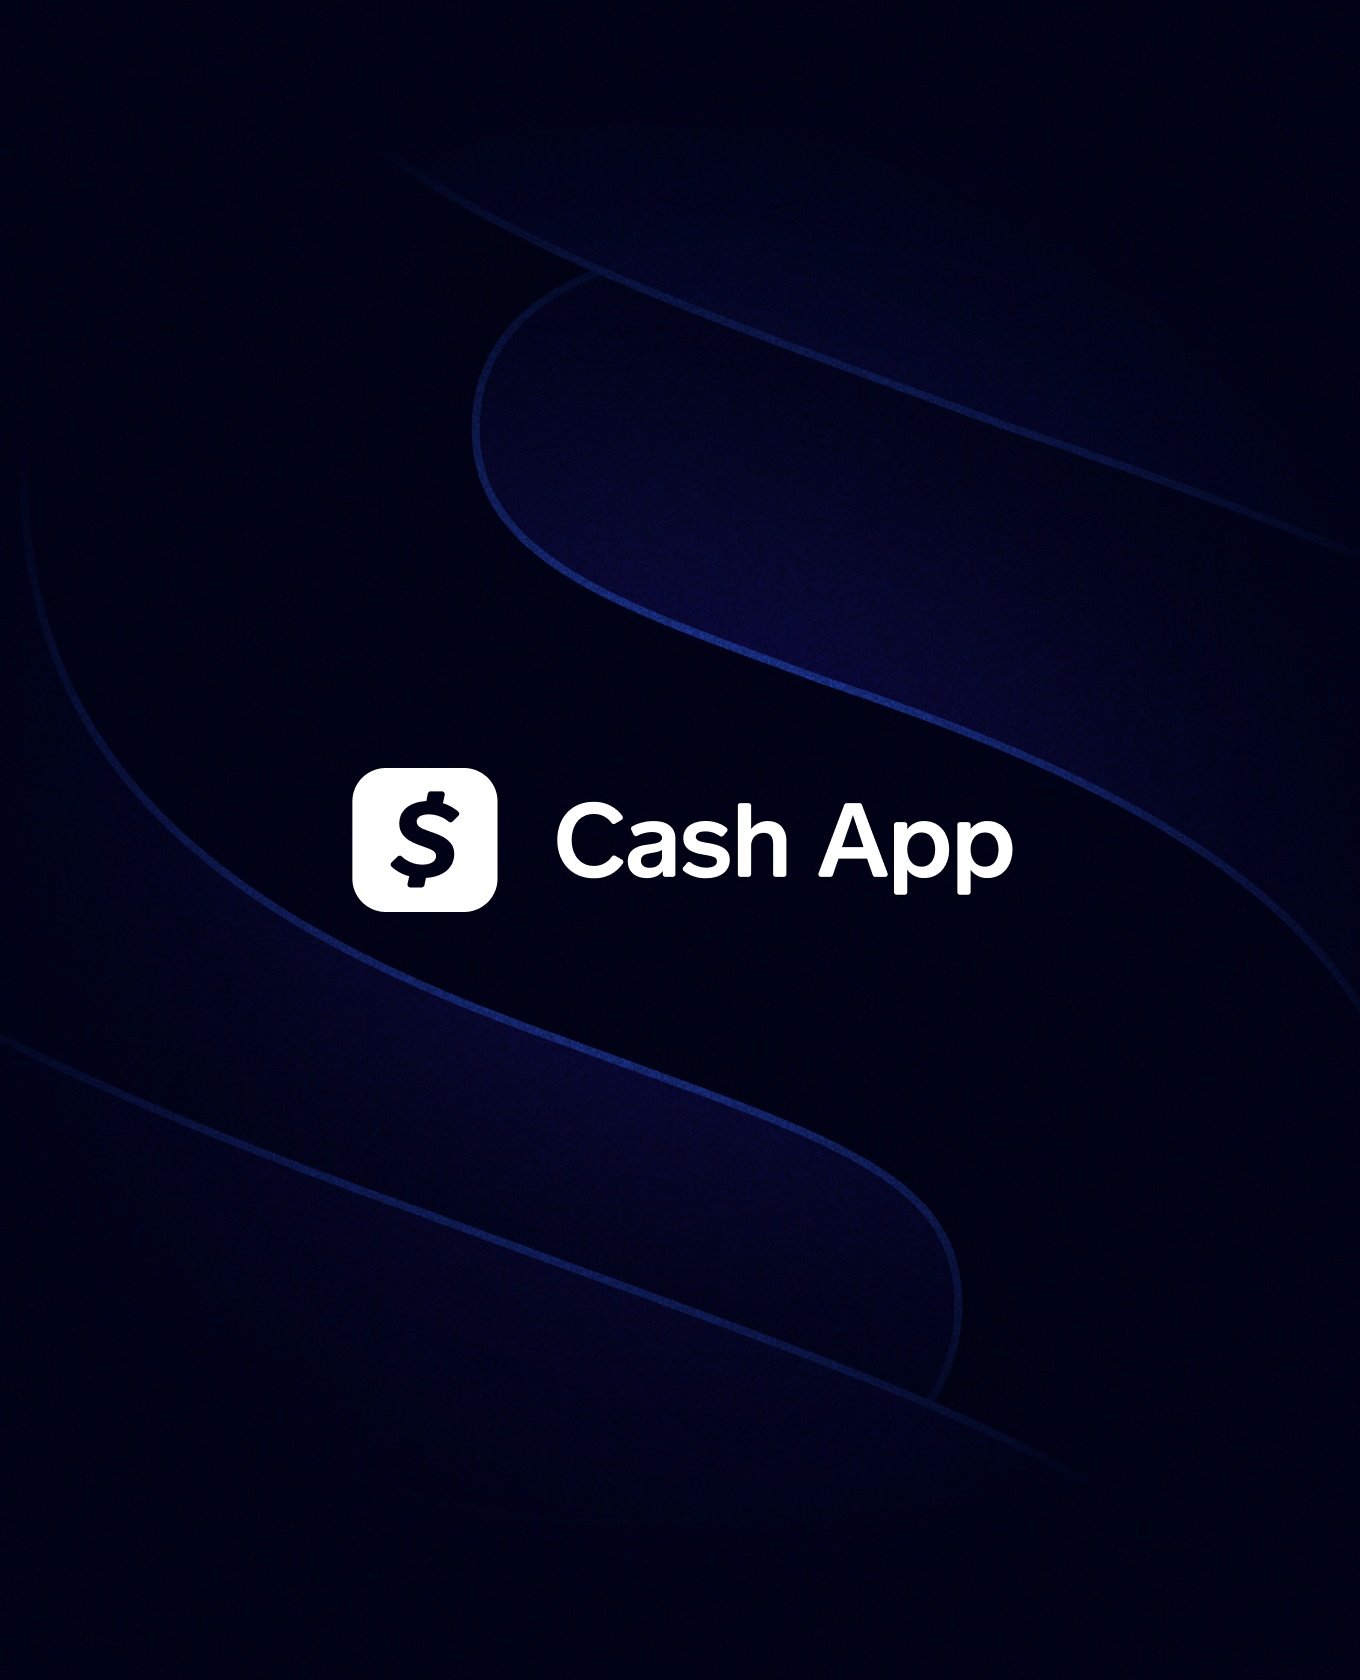 The Cash App wordmark against a dark but vibrant blue background composed of abstract and expanded shapes from the wordmark.